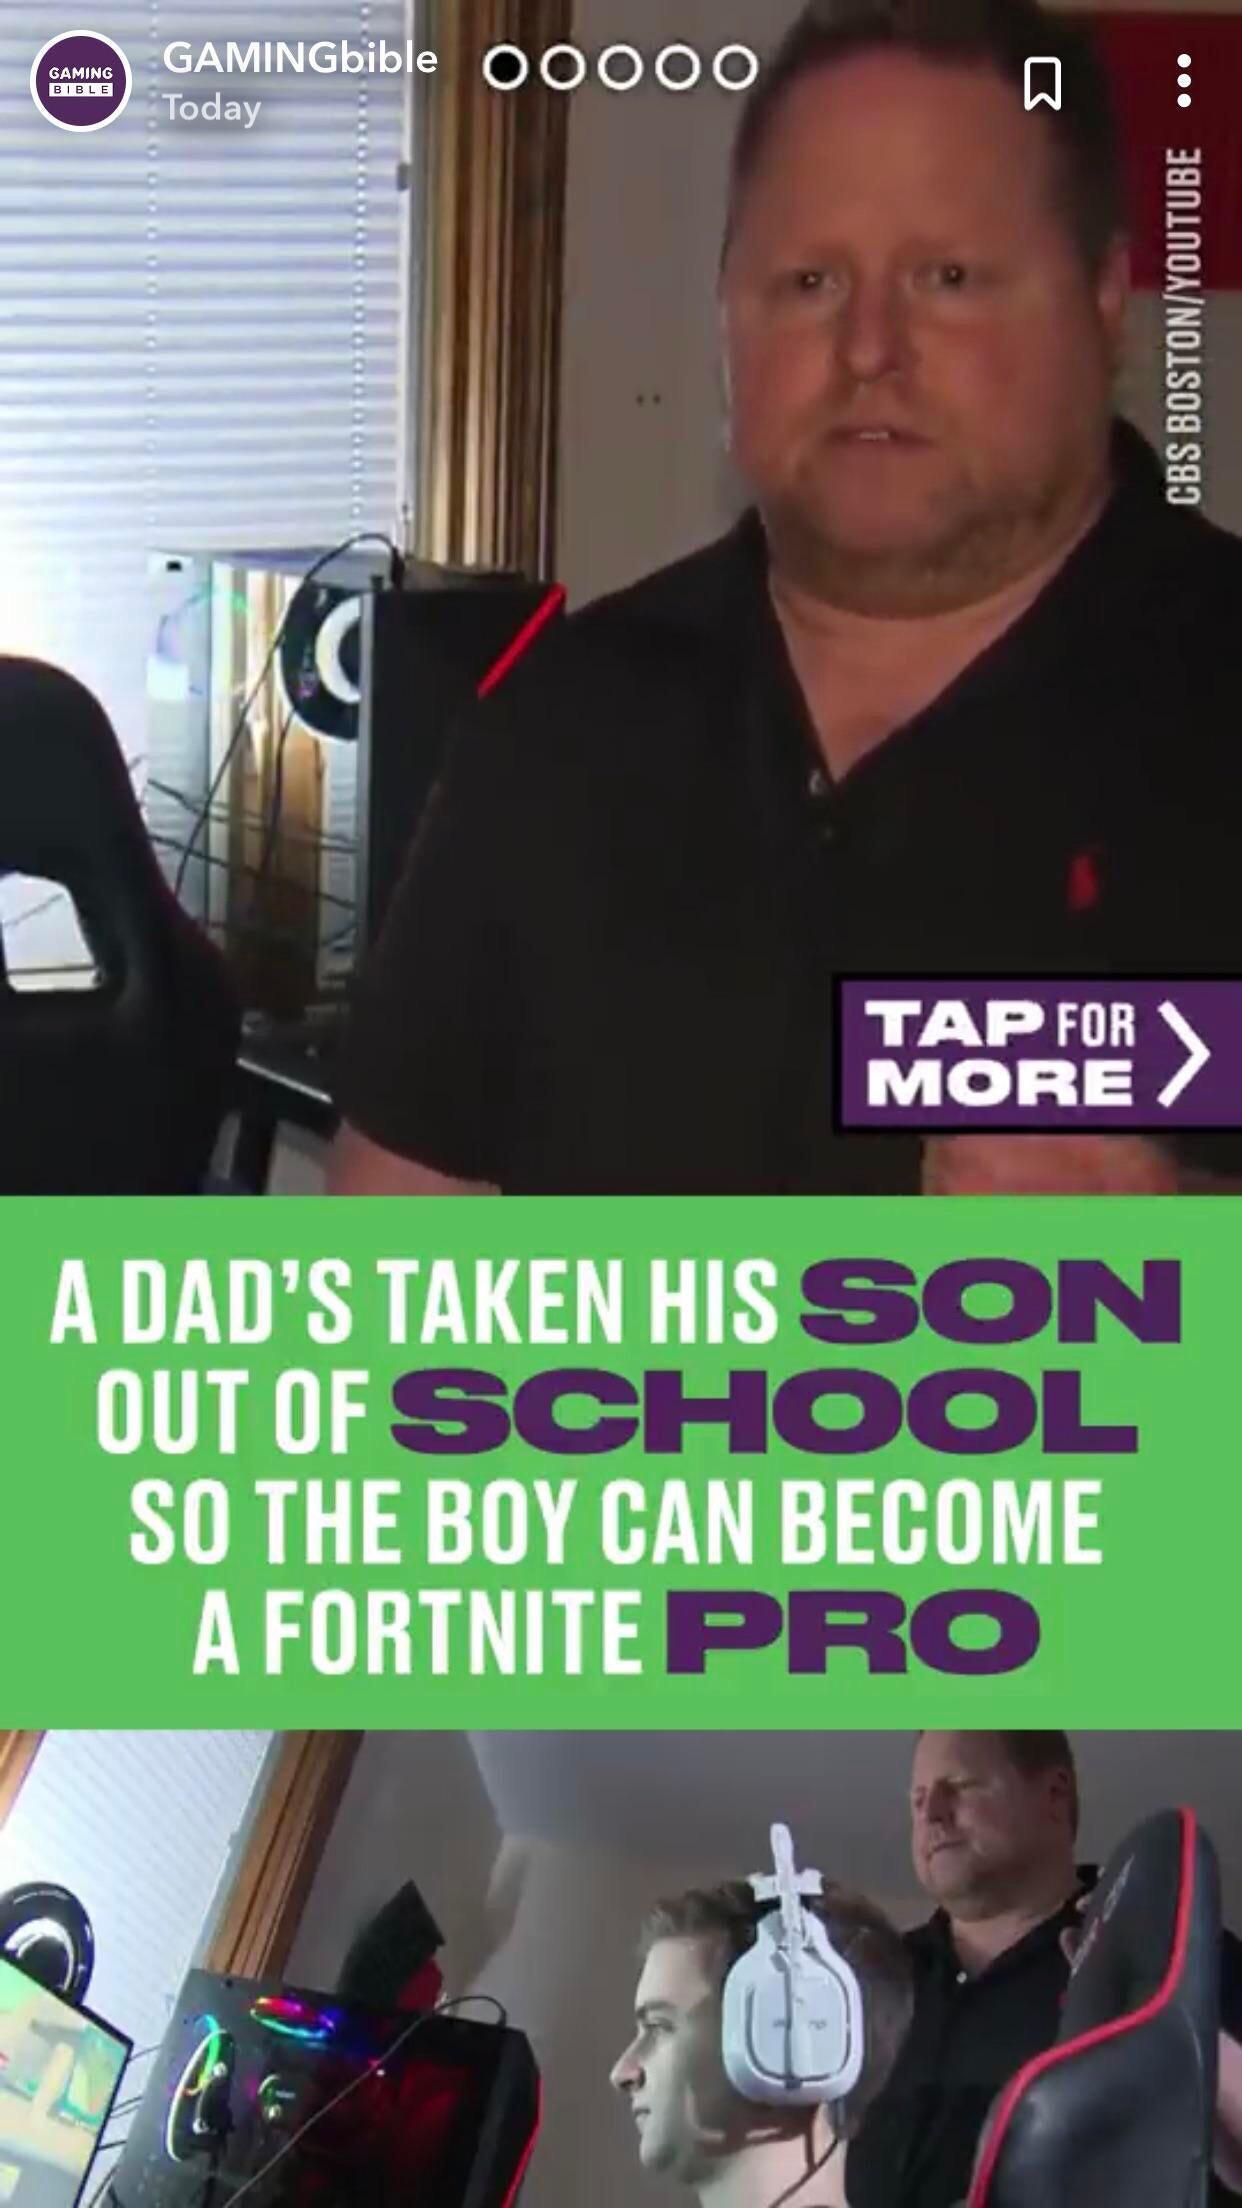 Gaming Bible GAMINGbible ooooo Today Cbs BostonYoutube ... Tap For More A Dad'S Taken His Son Out Of School So The Boy Can Become A Fortnite Pro